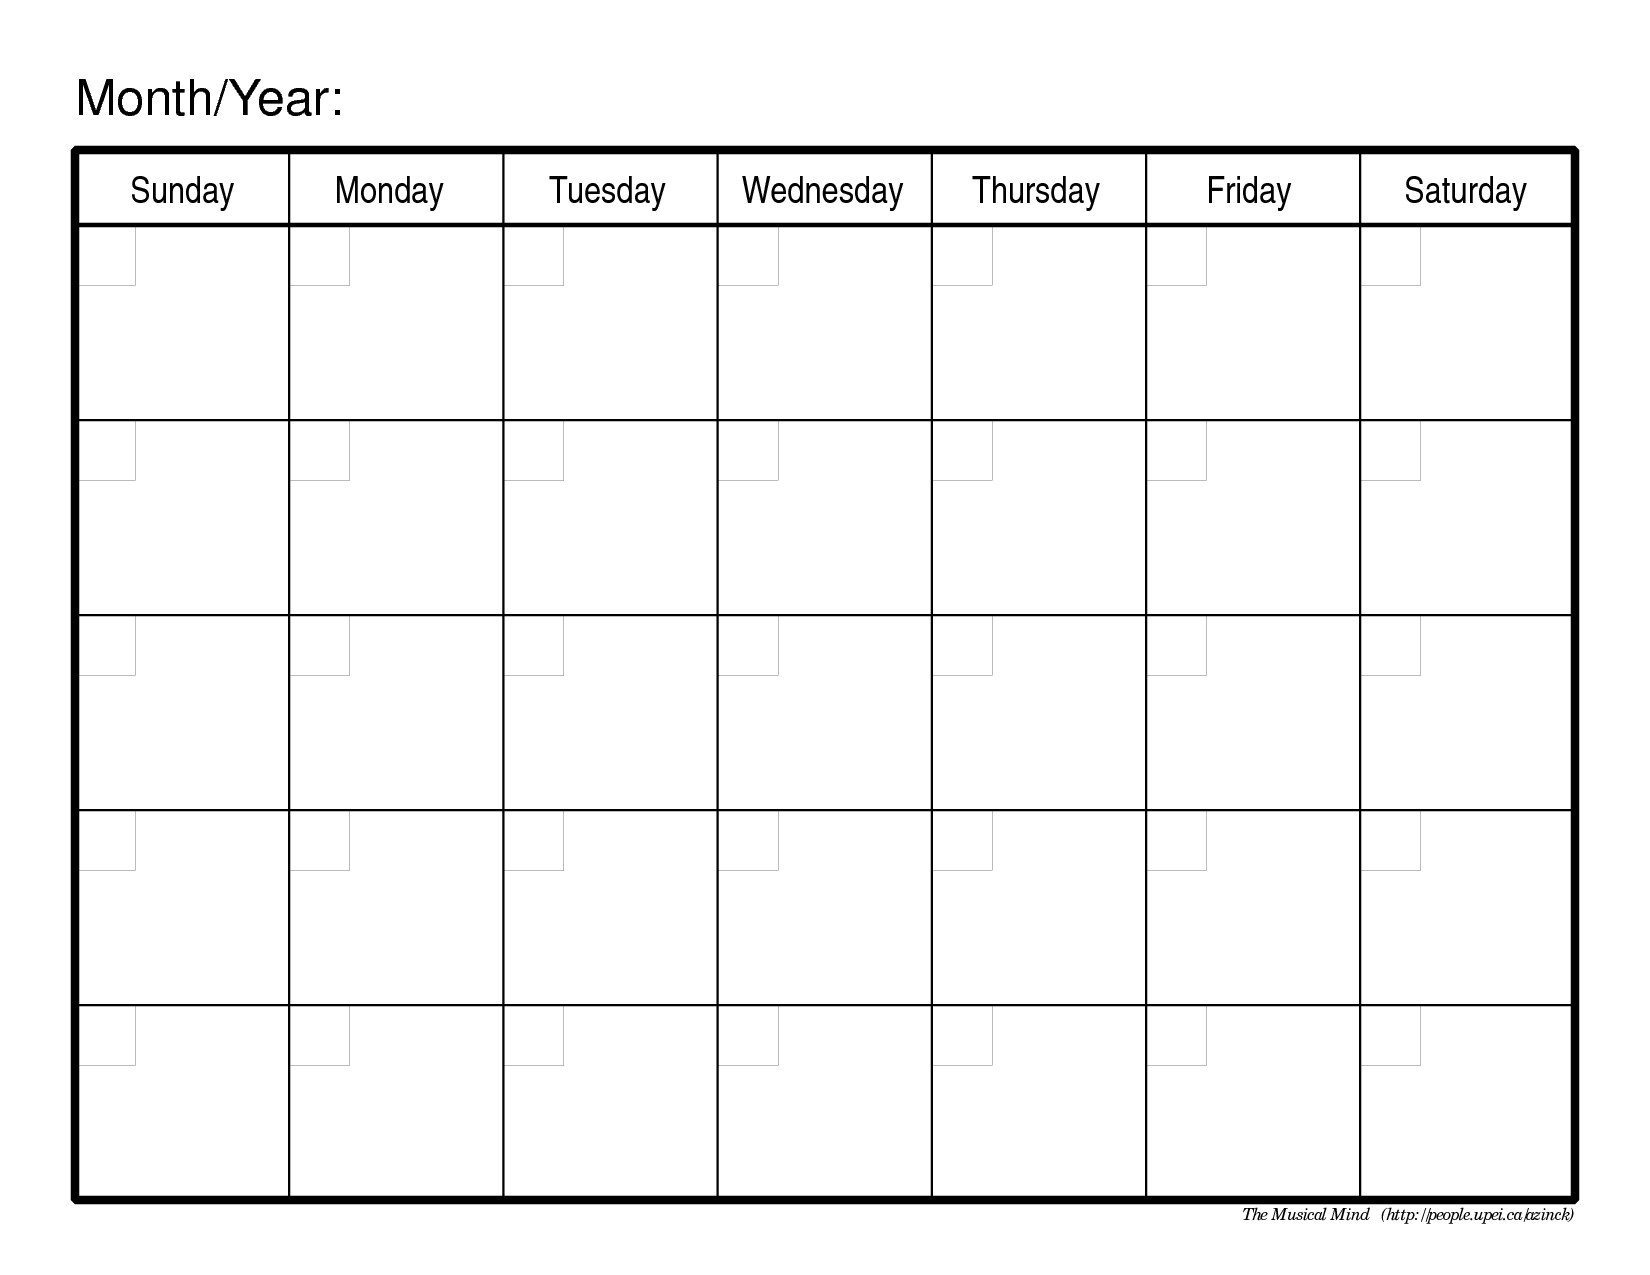 Free Monthly Schedule Template Calendars To Print Planner Word within Free Monthly Calendars To Print